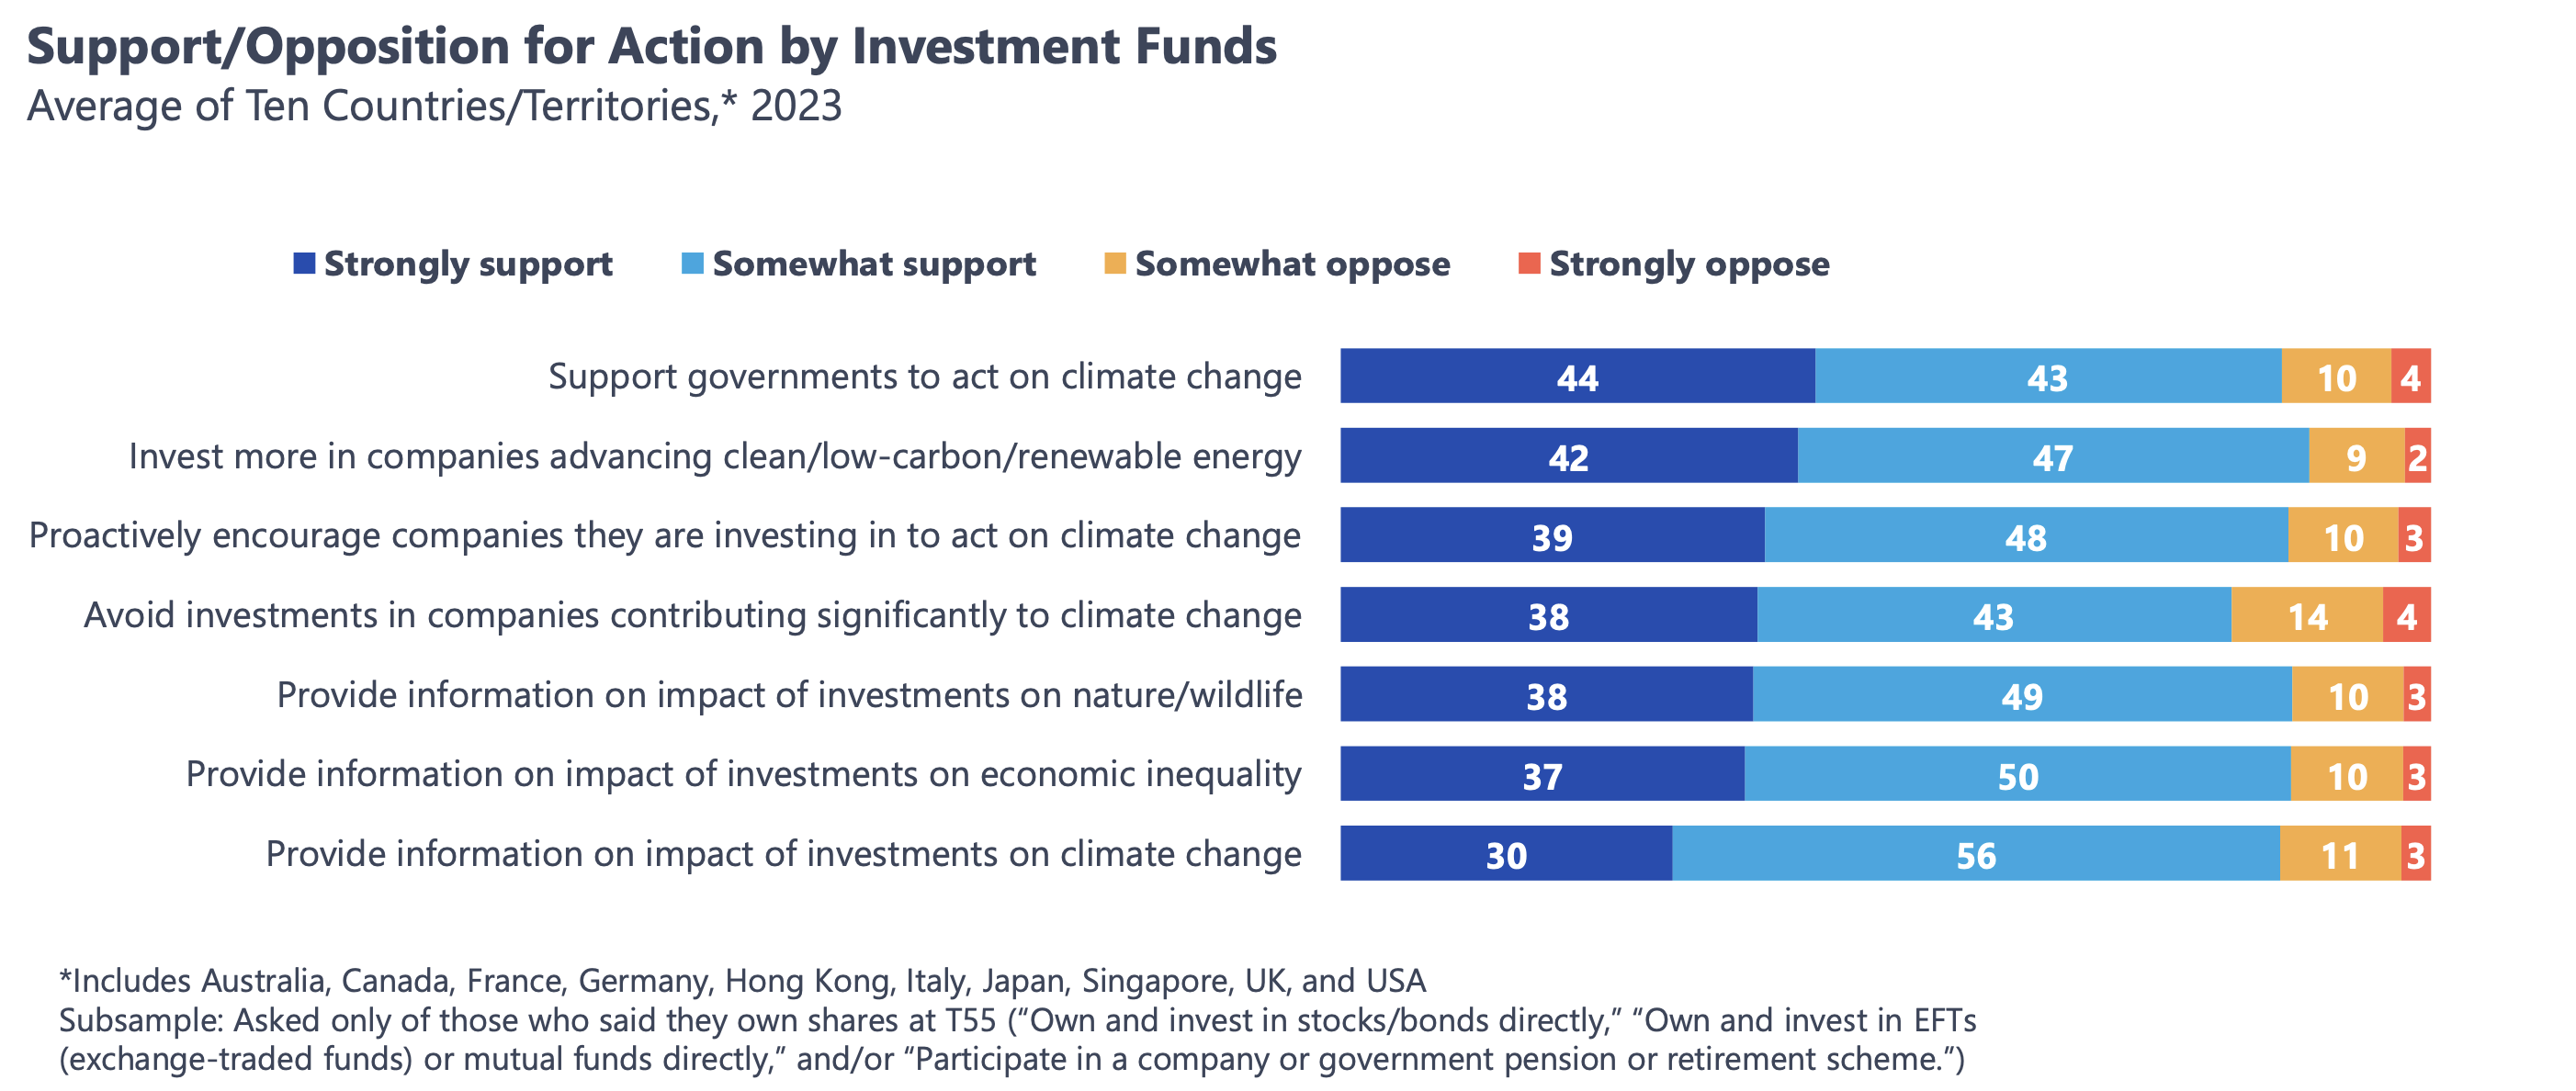 Investors support investment funds acting on climate biodiversity and inequality - survey finds